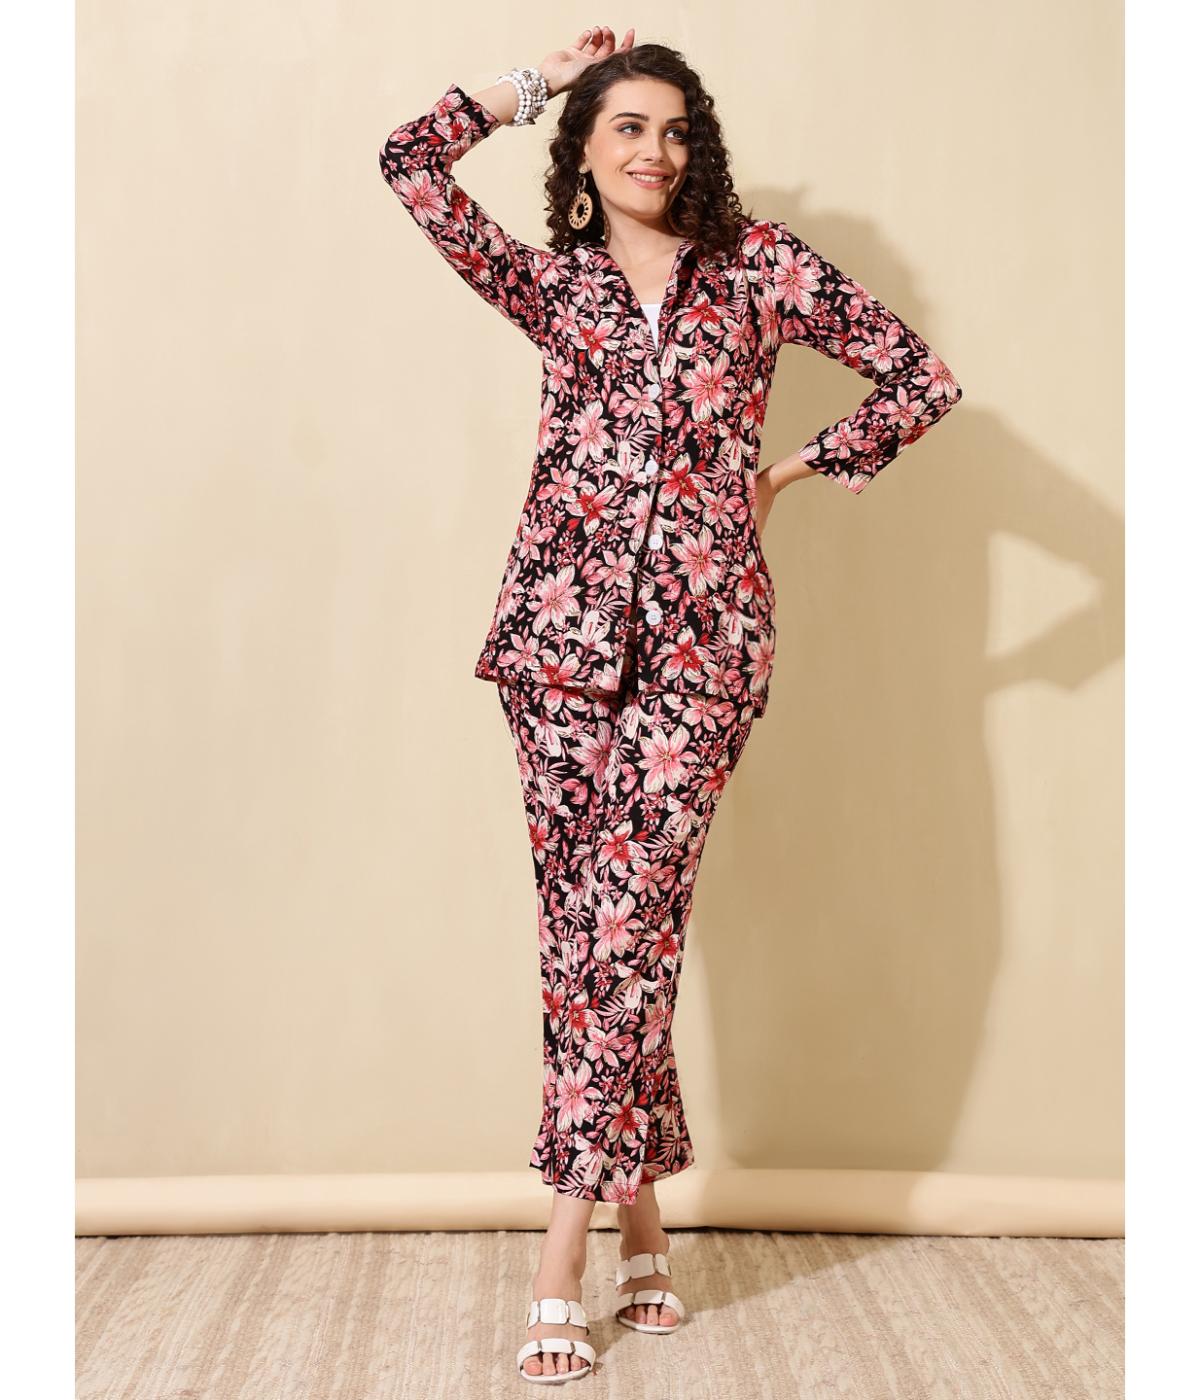 Daevish New Rayon Floral Printed Blazer with Pant Co Ord Set for Women & Girl's | Women Two Piece Co Ord Set | Casual Co Ord Set for Women